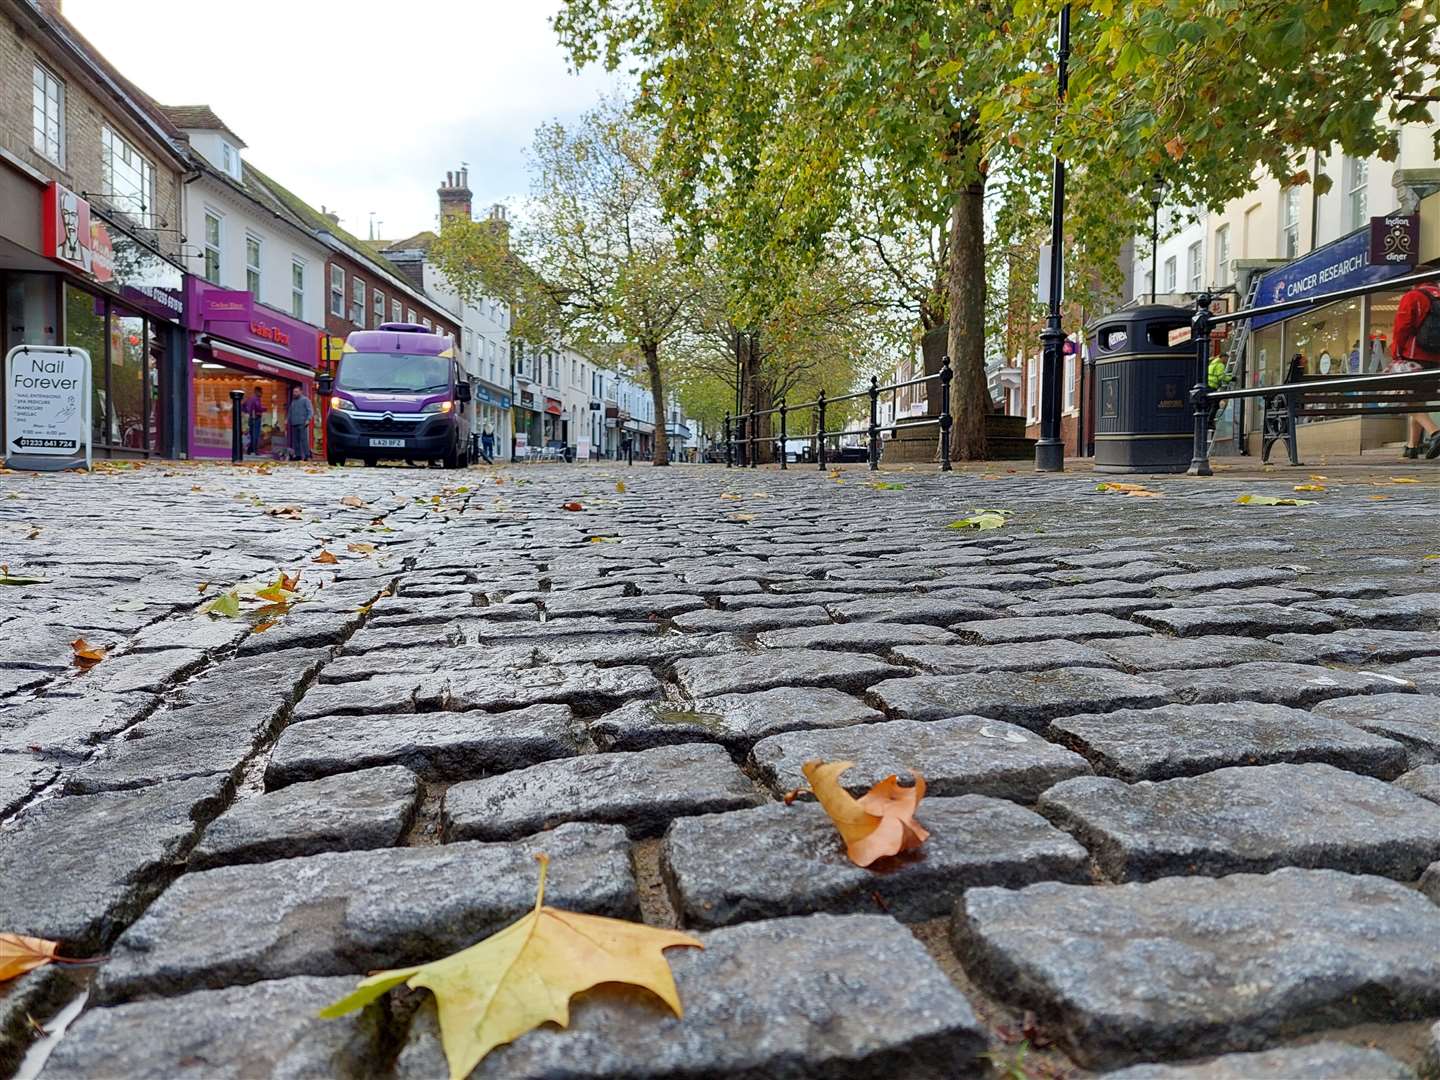 The cobbles were laid in the Lower High Street in 1999